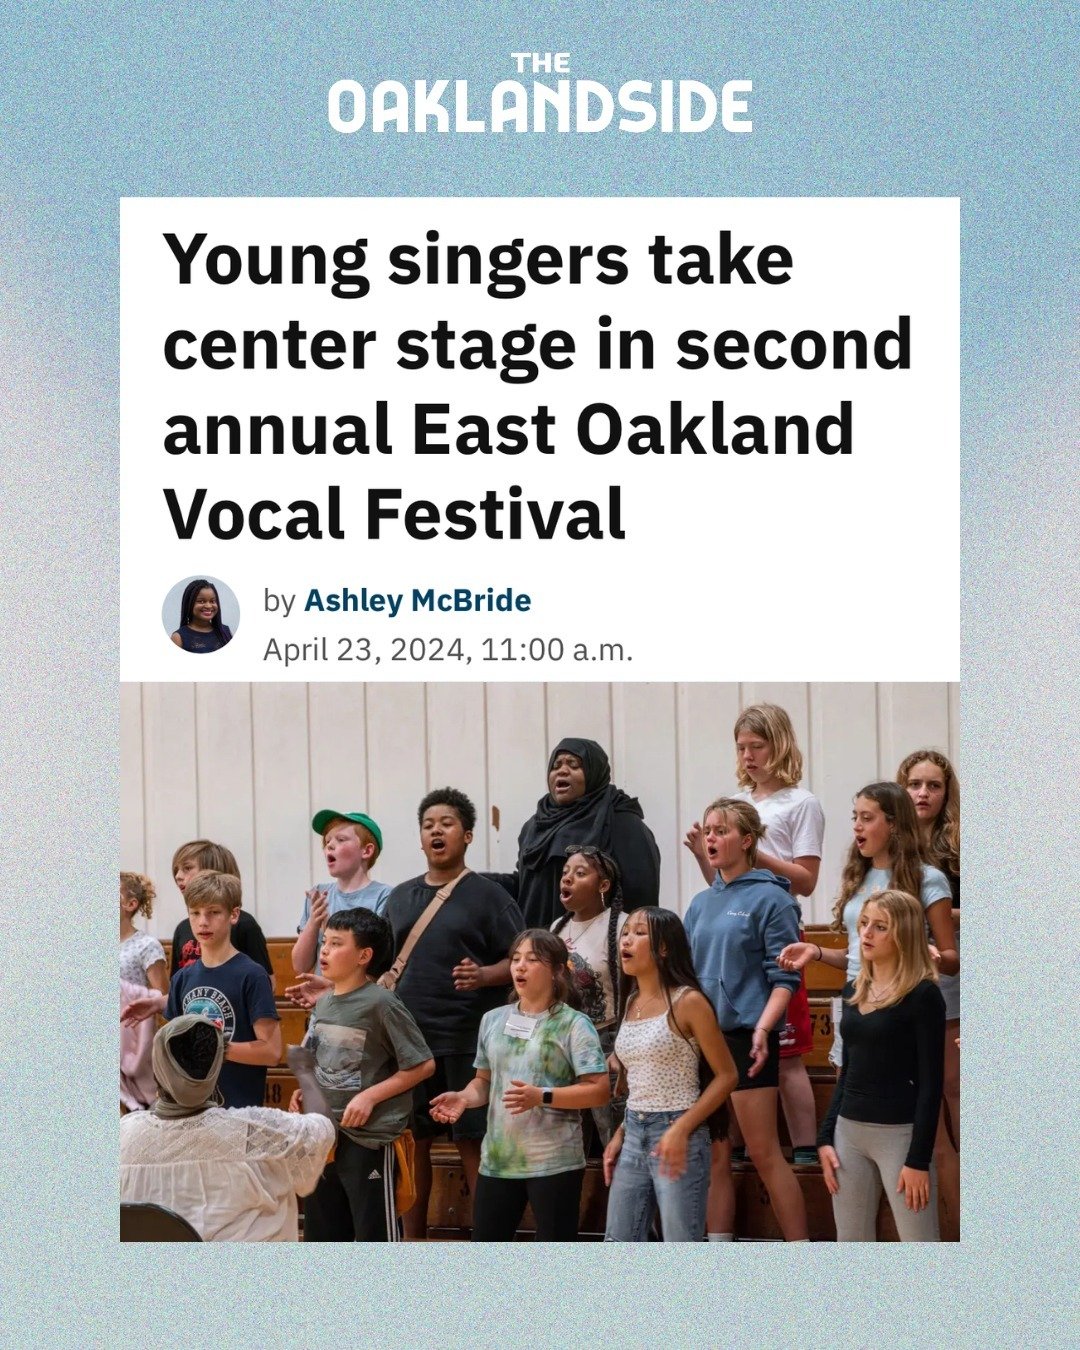 We're in @theoaklandside! 🎉 Thank you to education journalist Ashley McBride for visiting with our teachers and students to craft this thoughtful article featuring the East Oakland Vocal Program and upcoming Vocal Festival (happening tonight!!) 

Qu